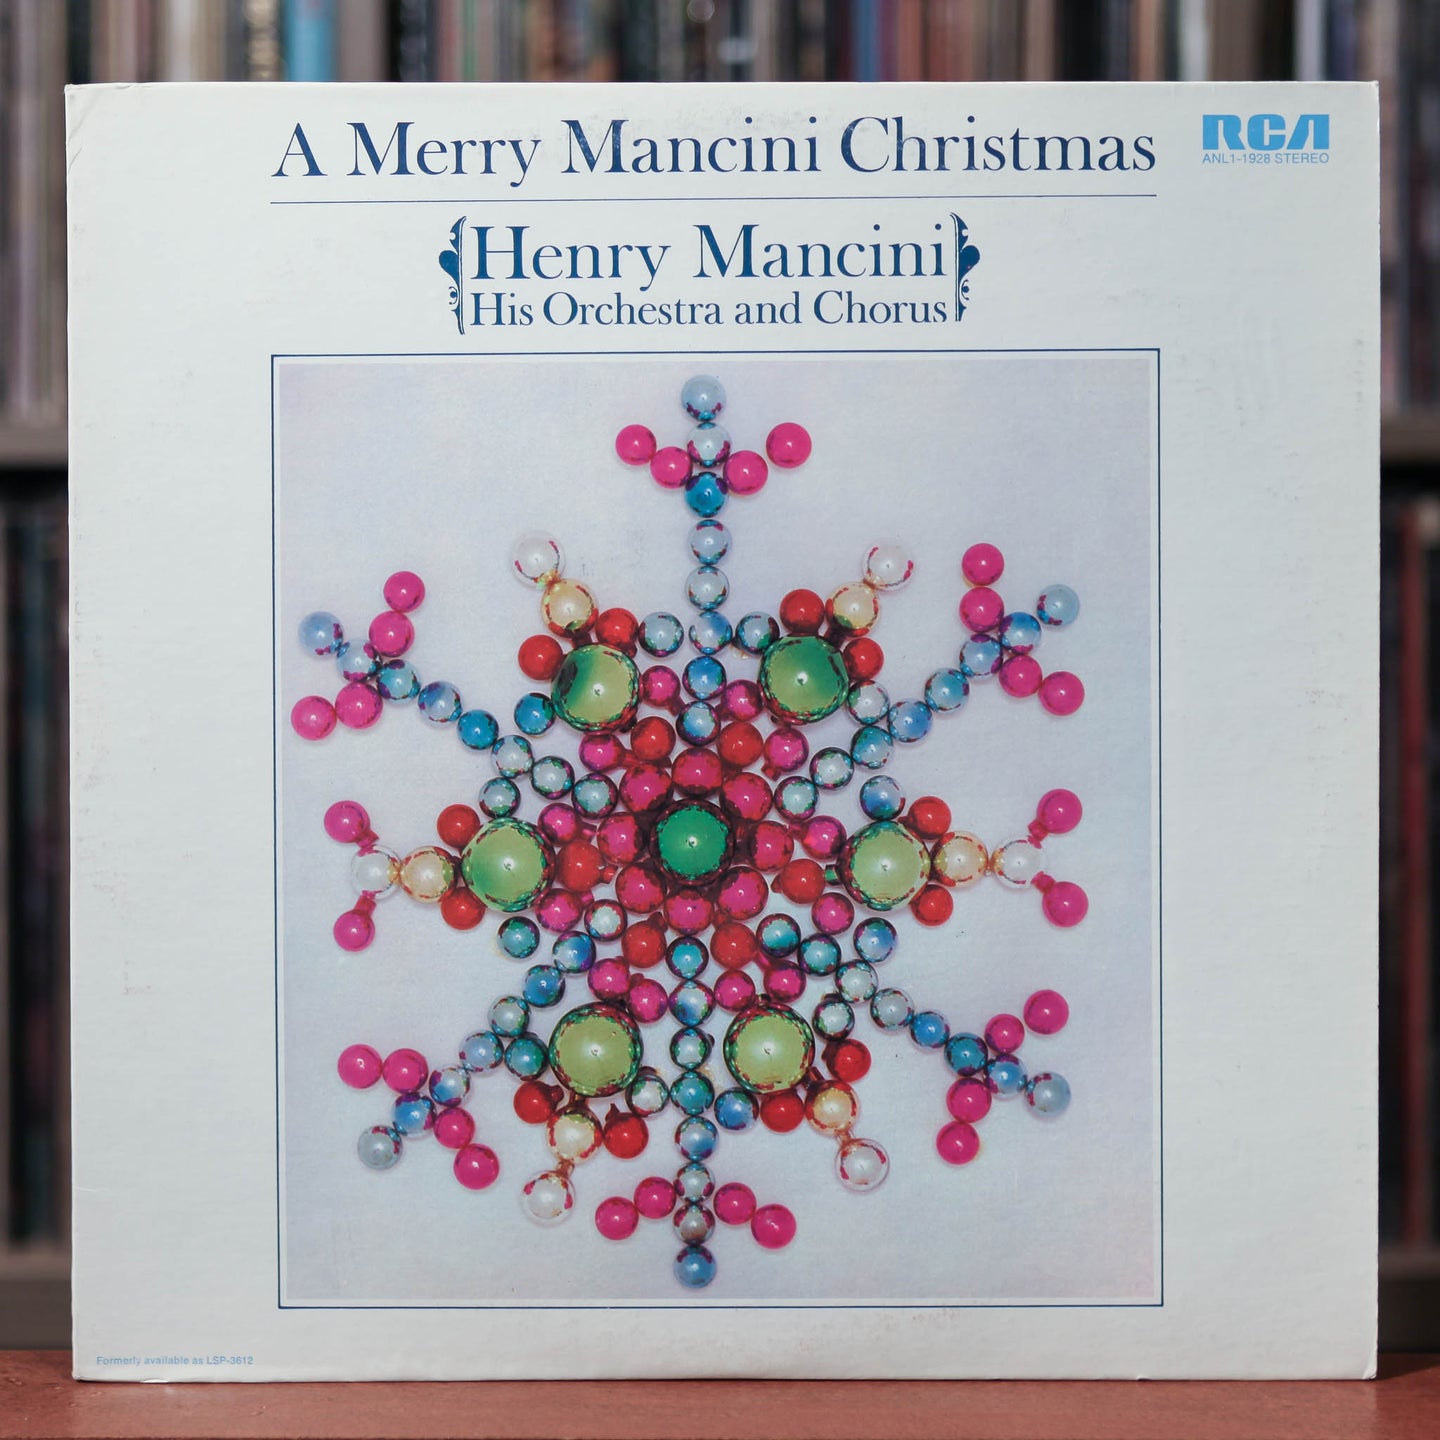 Henry Mancini, His Orchestra And Chorus - A Merry Mancini Christmas - 1970's RCA, EX/VG